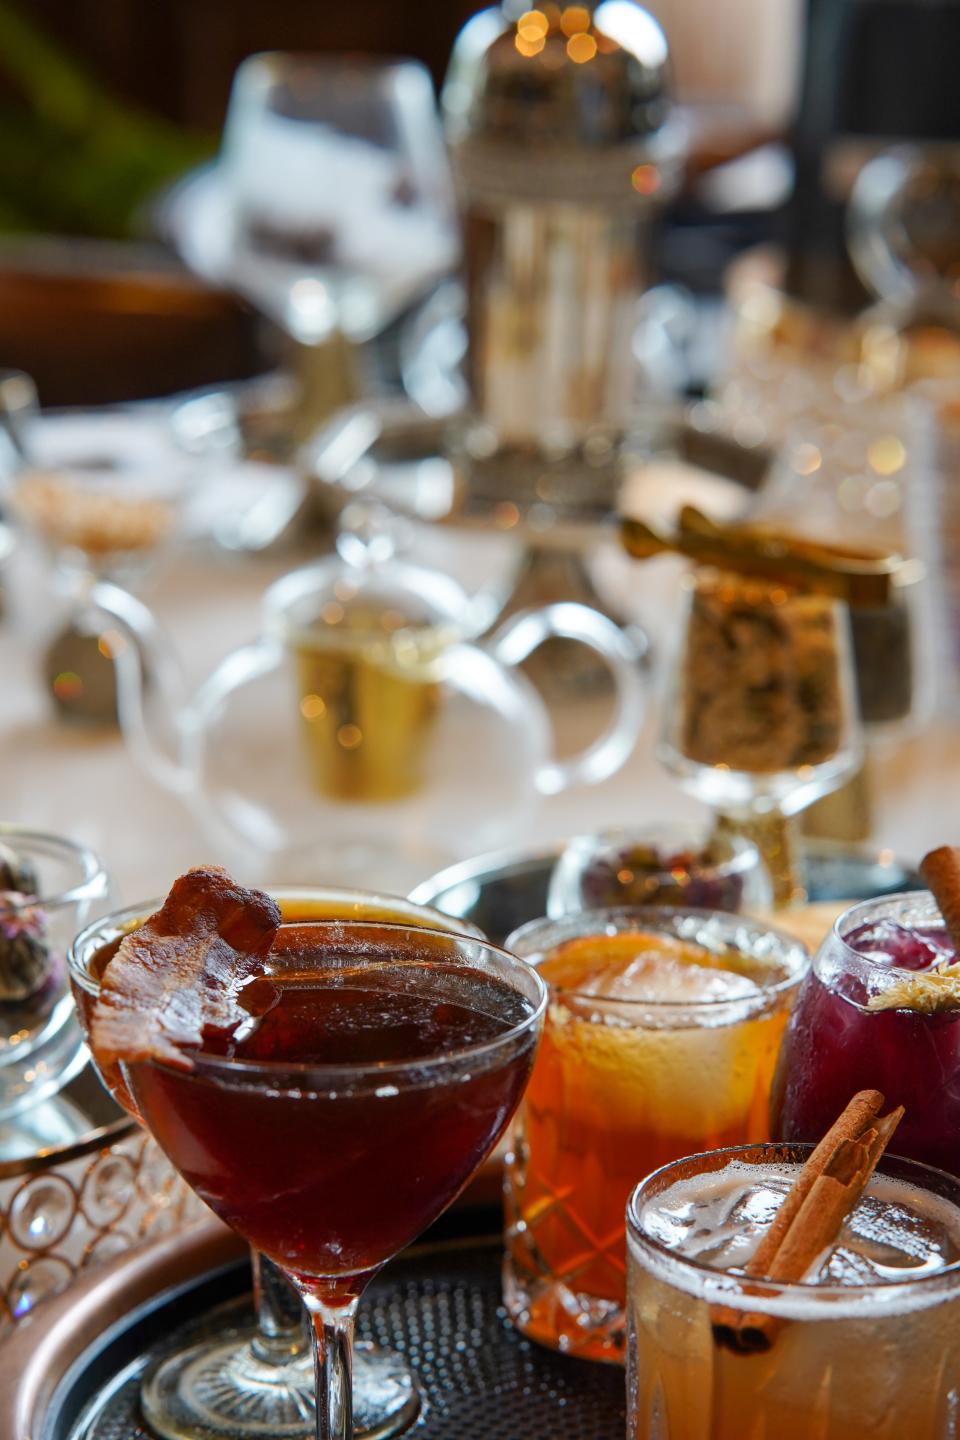 Along with a variety of classic hot teas, The Ben hotel's new high tea service offers several boozy "improper" teas in West Palm Beach.